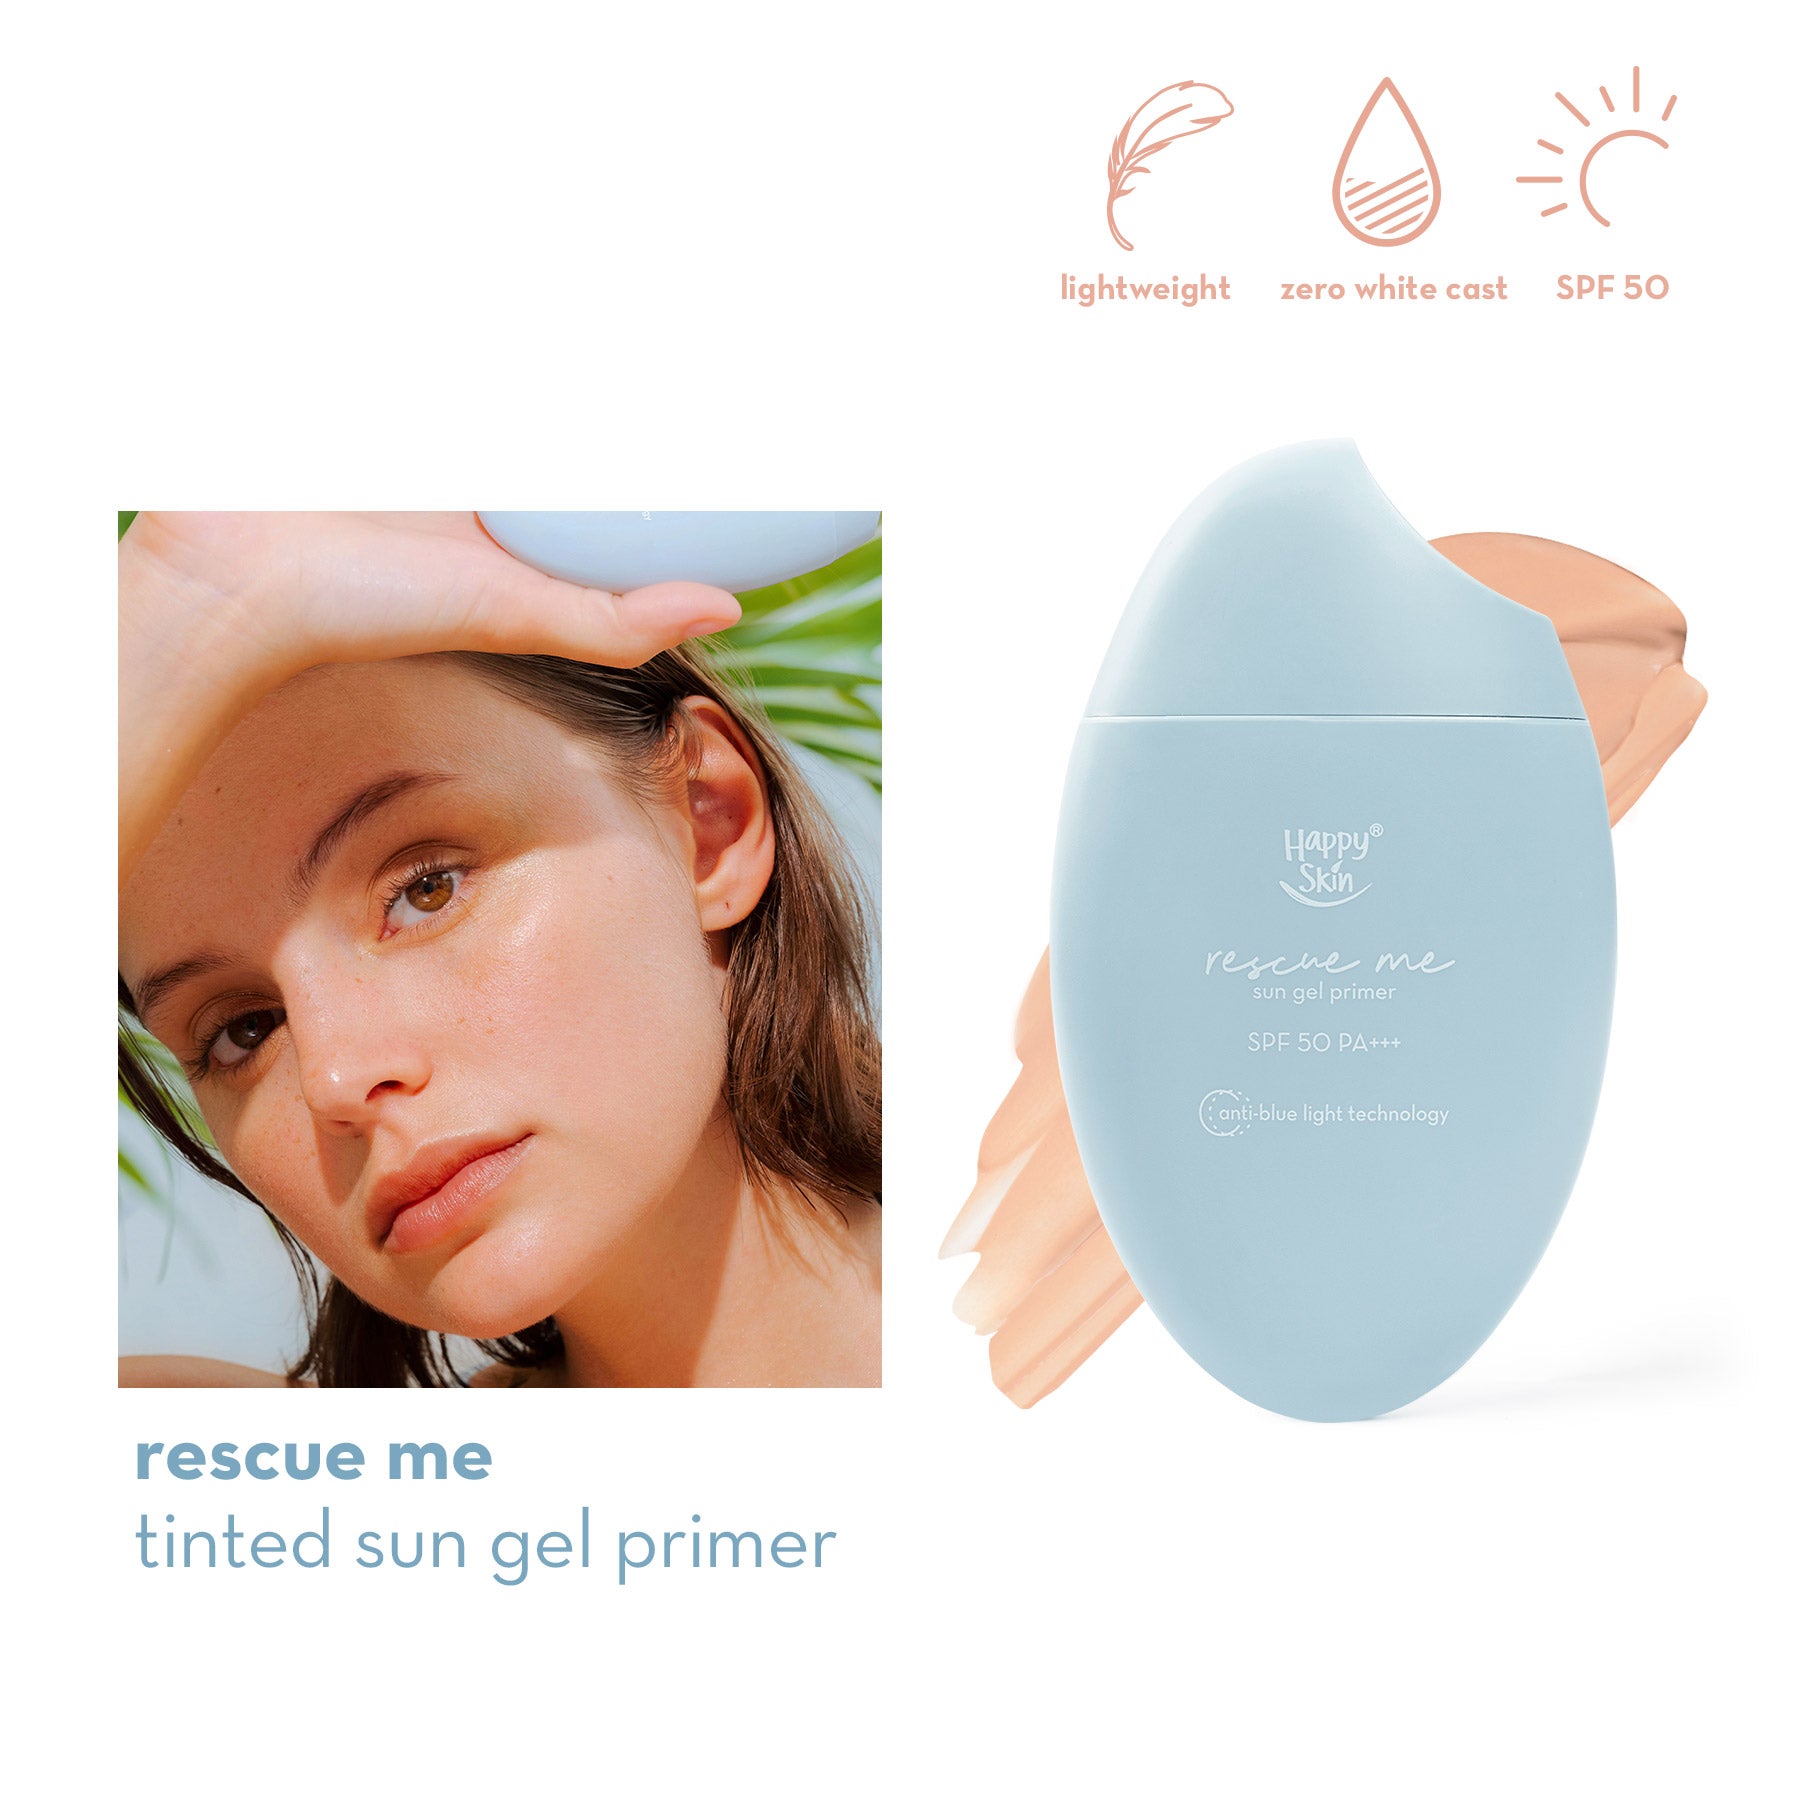 Happy Skin Rescue Me Tinted Sun Gel Primer SPF 50 PA+++ with Anti-Bluelight Technology